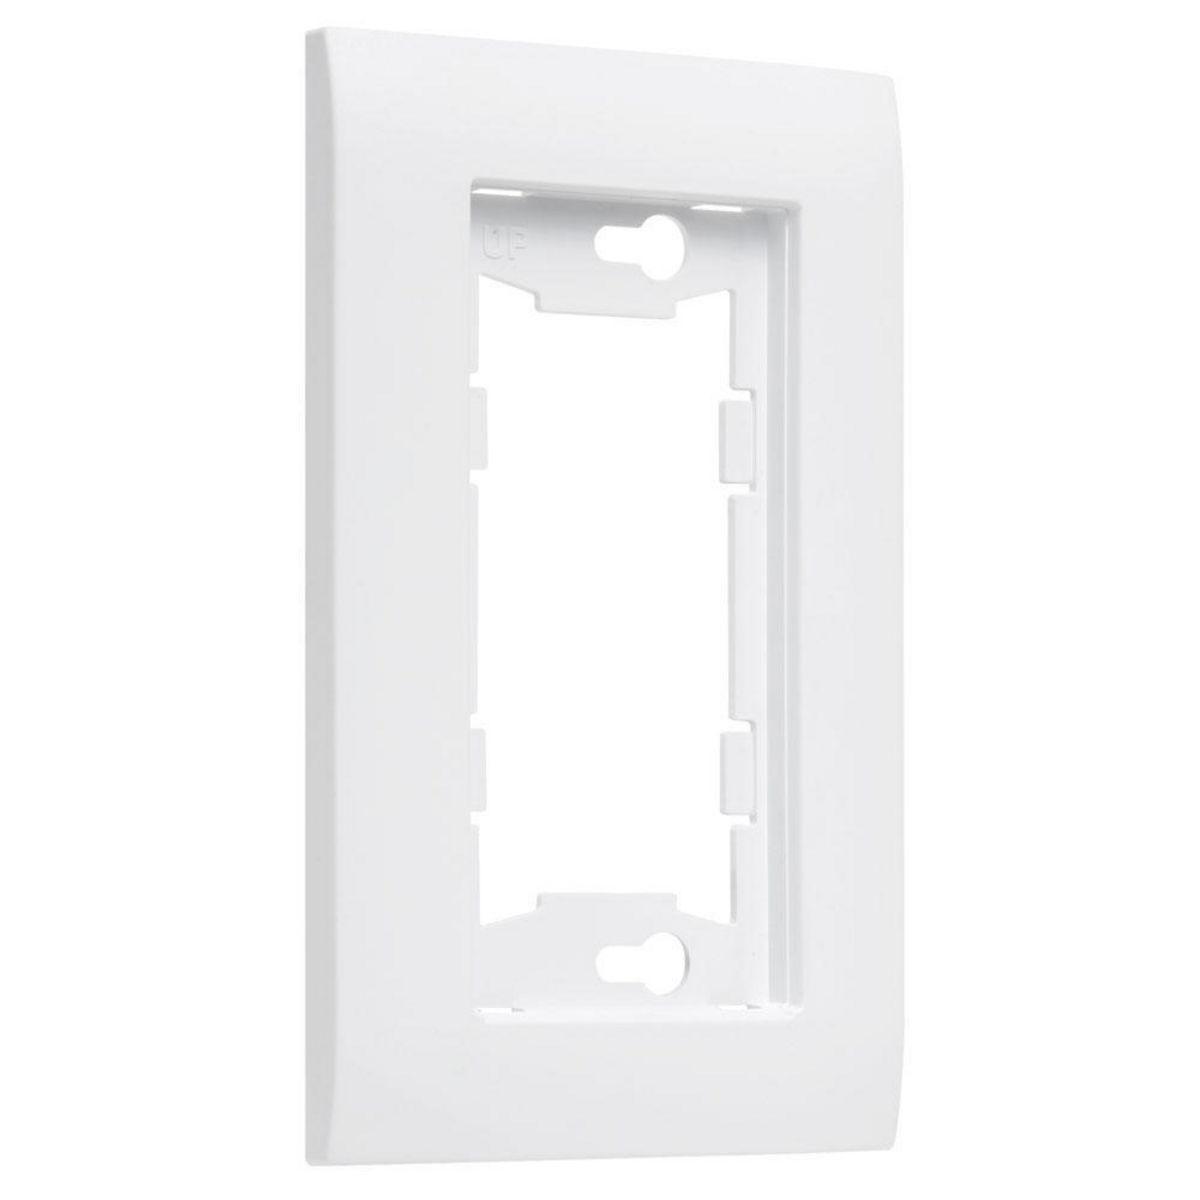 ALLURE 1G WALL PLATE WHITE